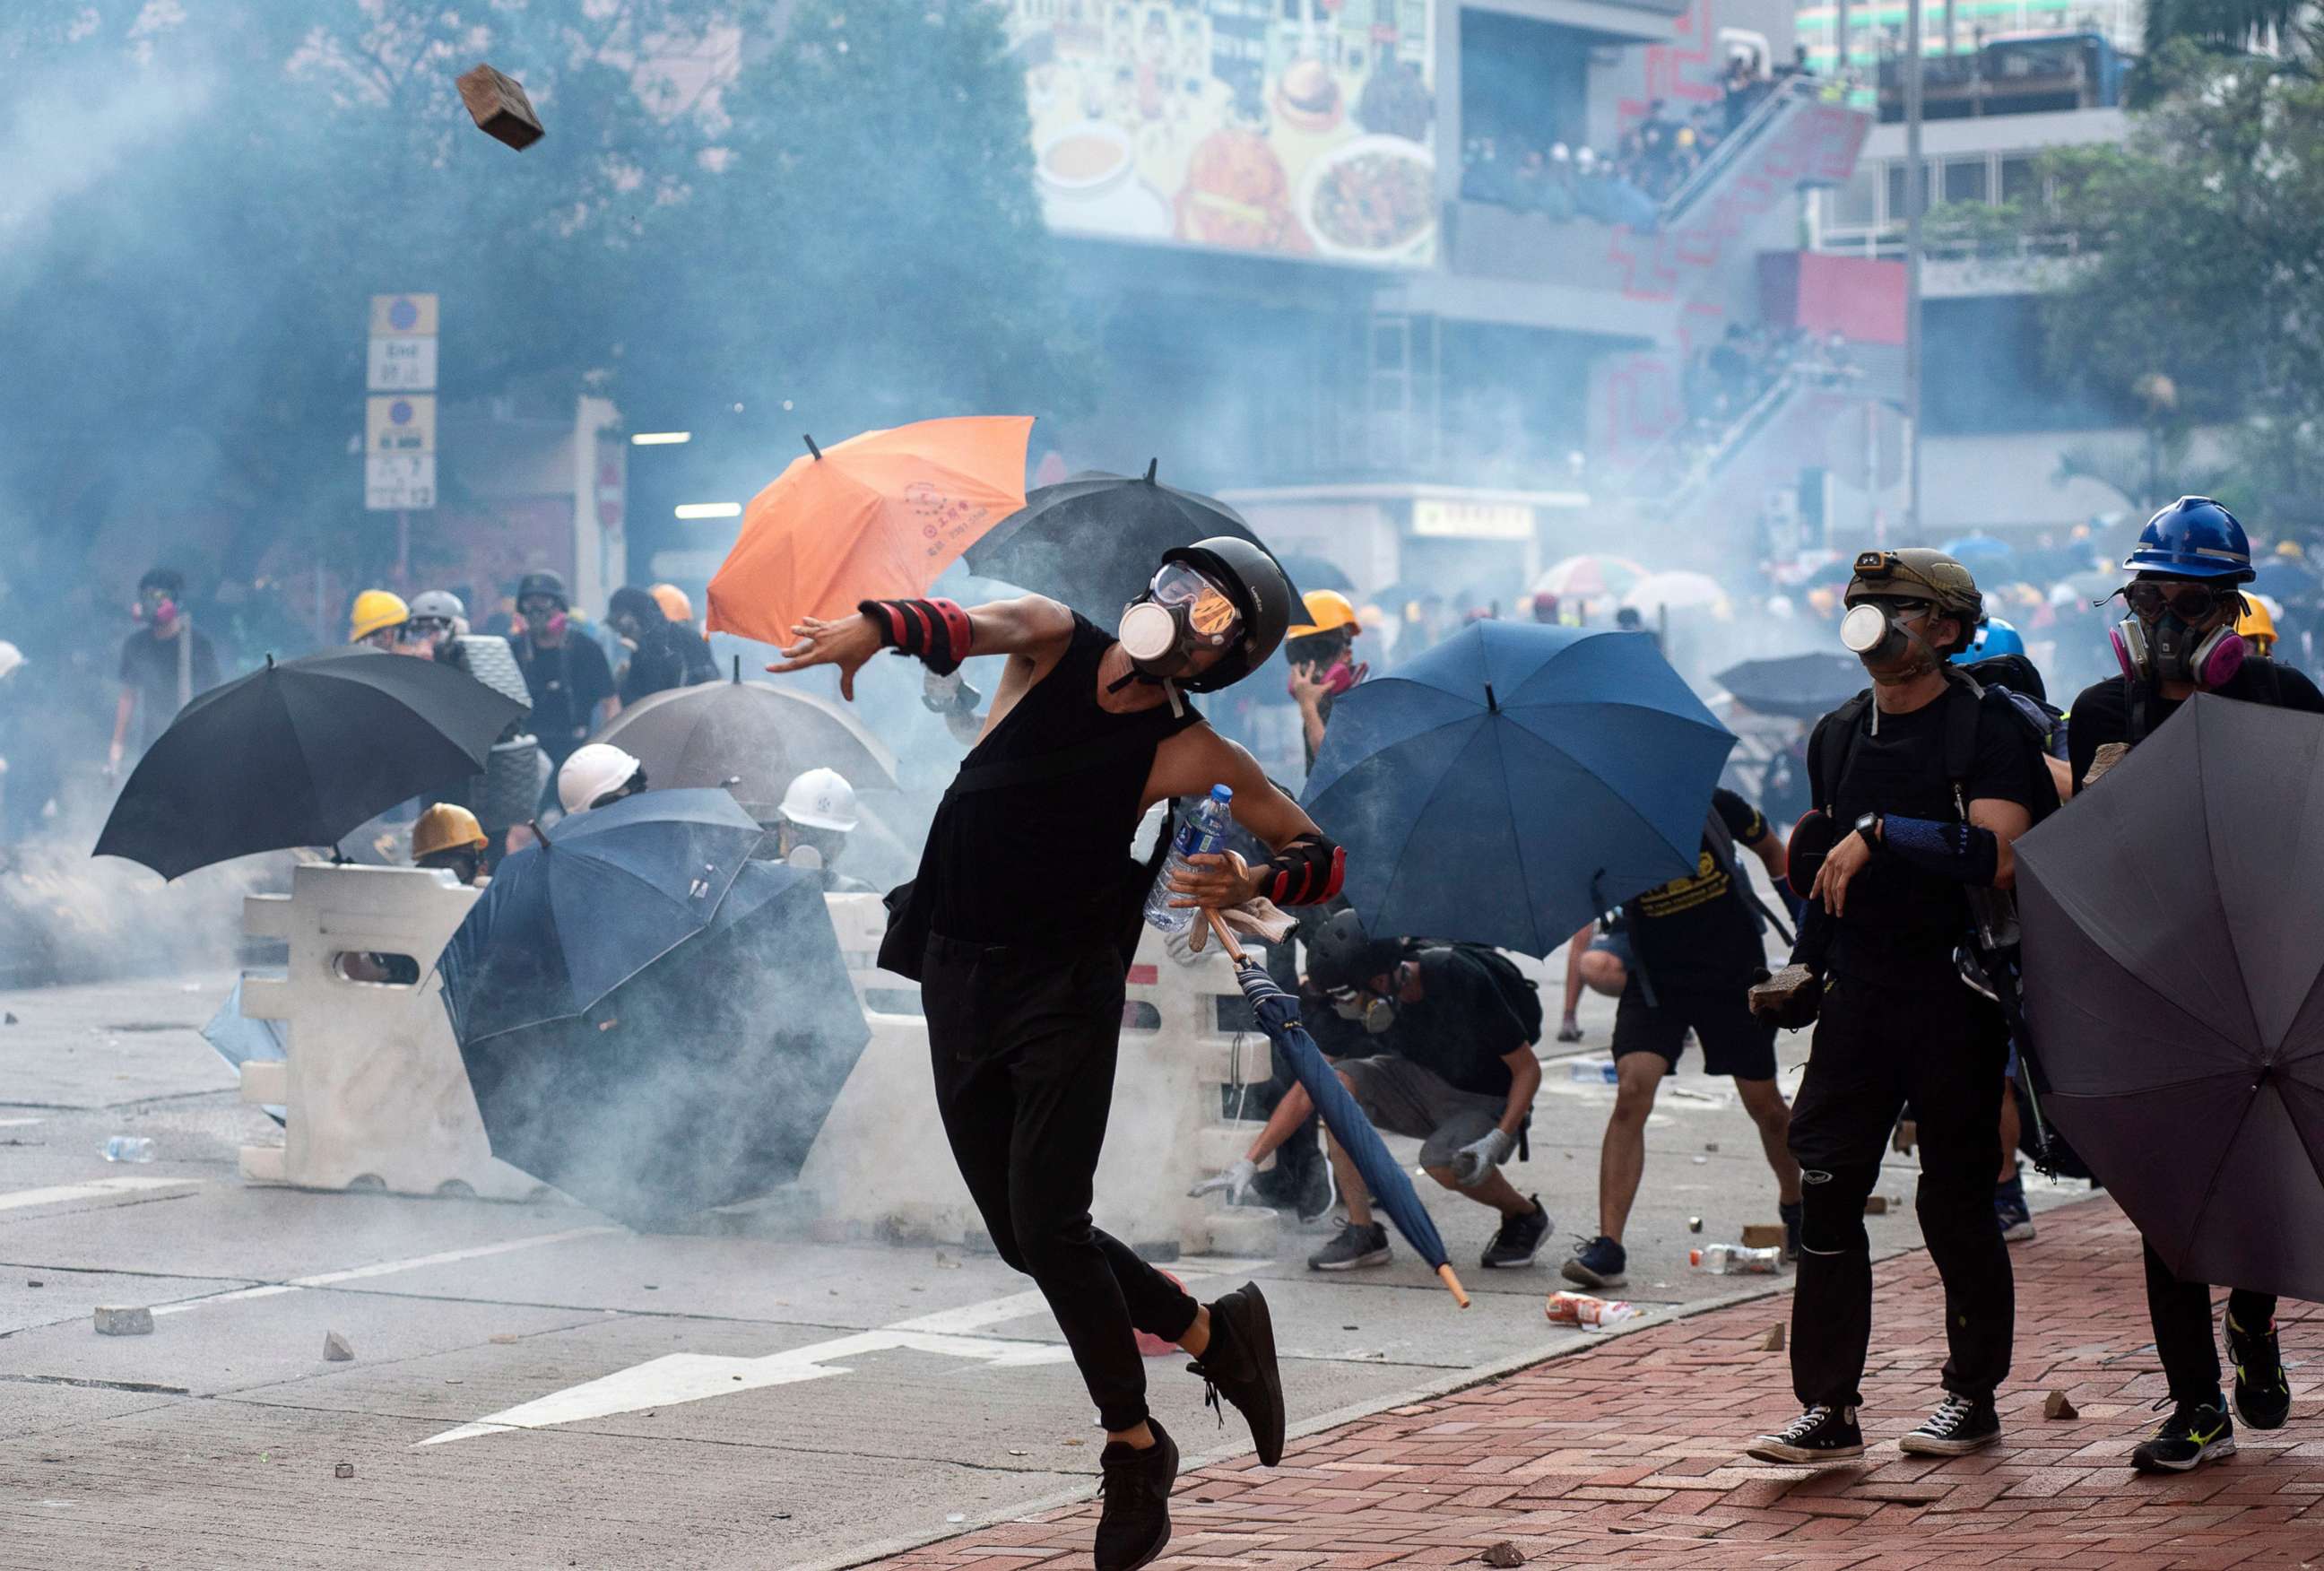 PHOTO: Anti-extradition protesters throw bricks after police fired tear gas at them during clashes in Wong Tai Shin area in Hong Kong, China, Aug. 5, 2019.